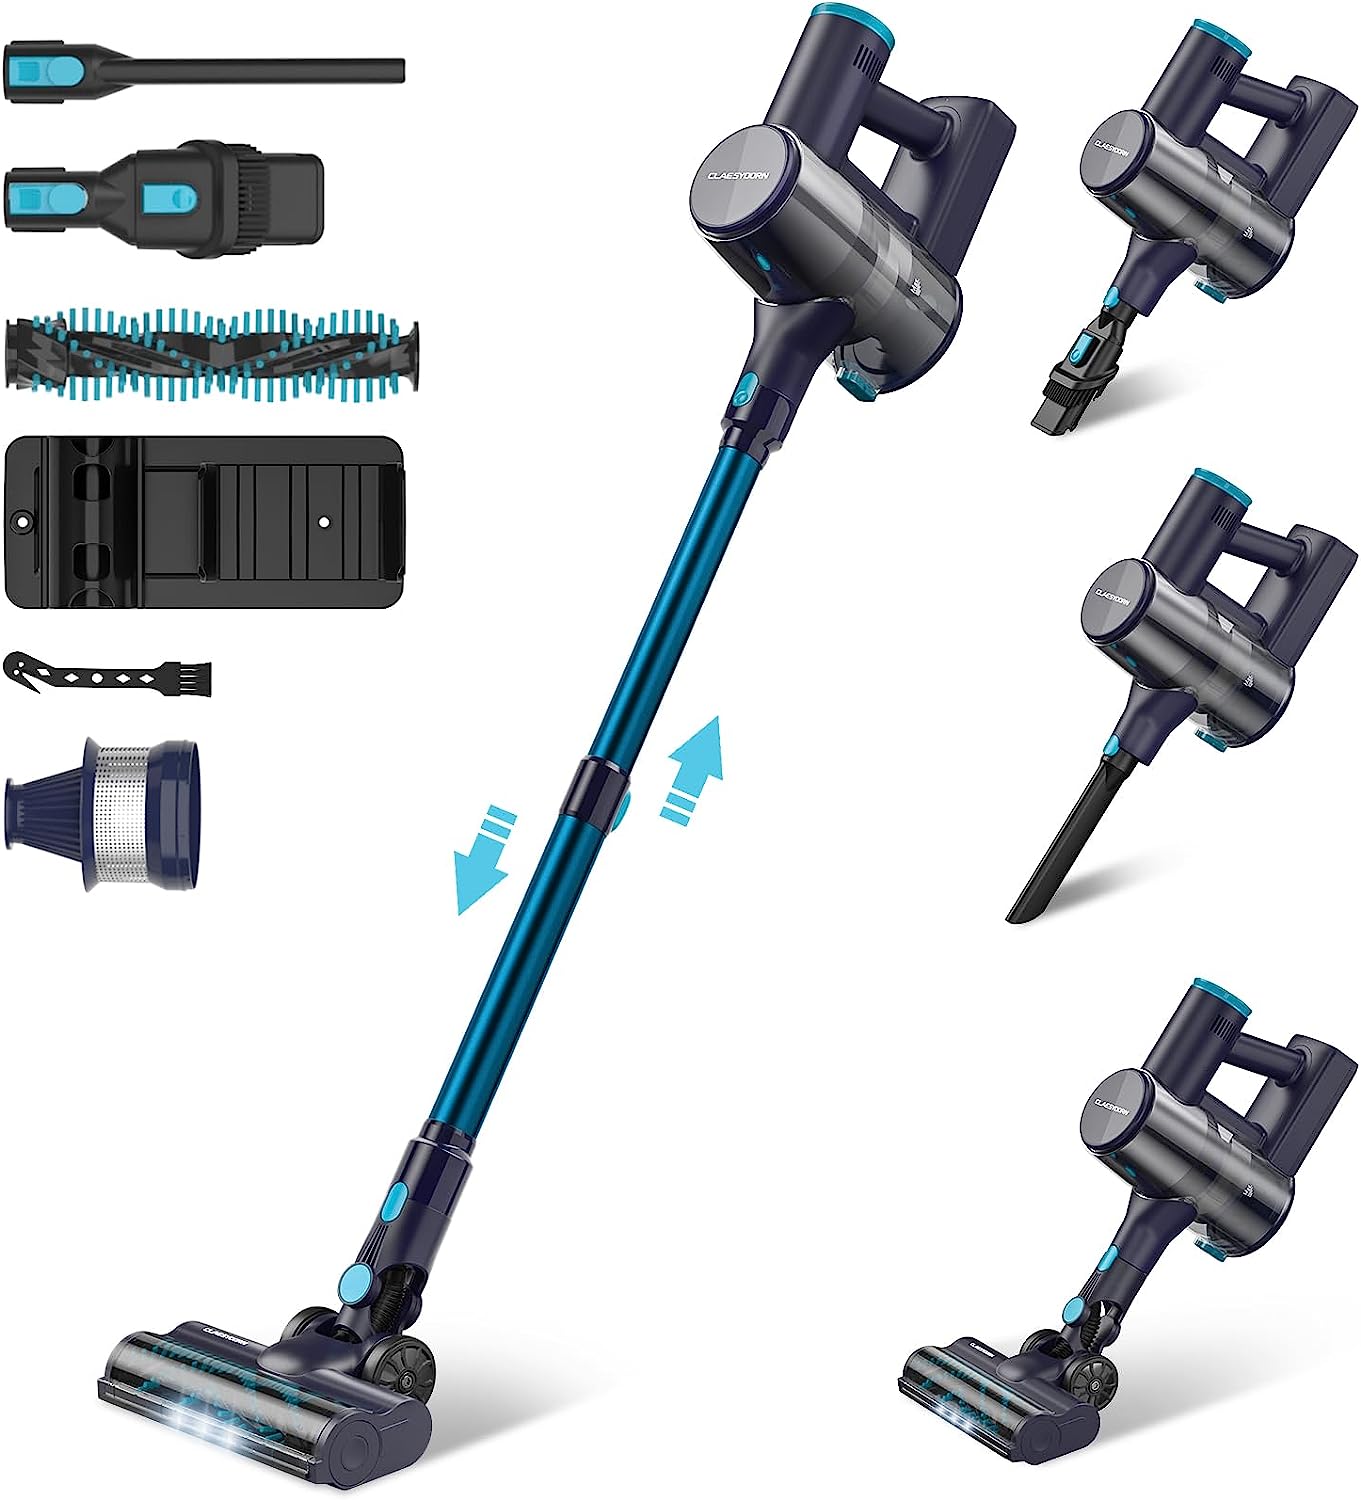 Claesydorn Cordless Vacuum Cleaner, 250W Powerful [...]